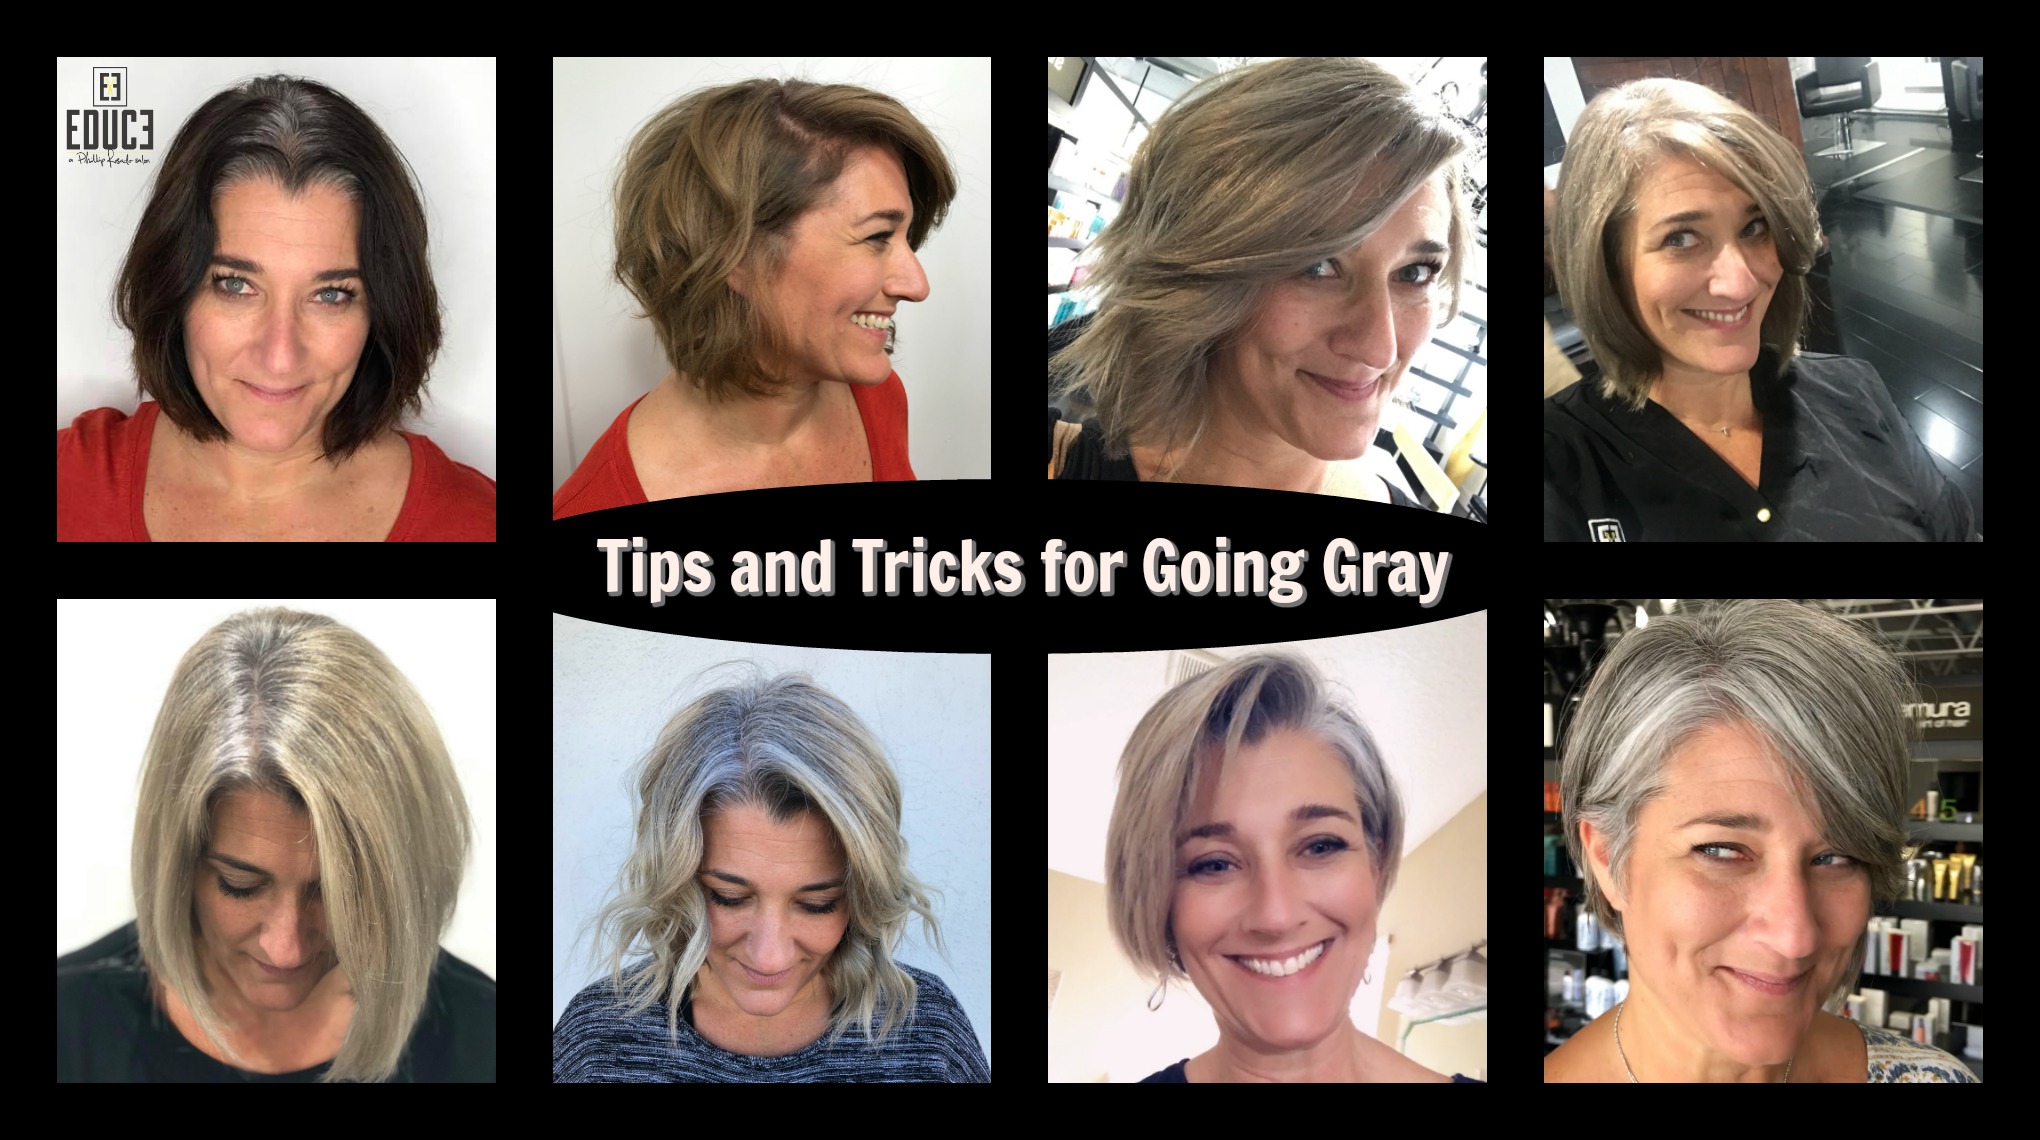 Tips and Tricks for Going Gray